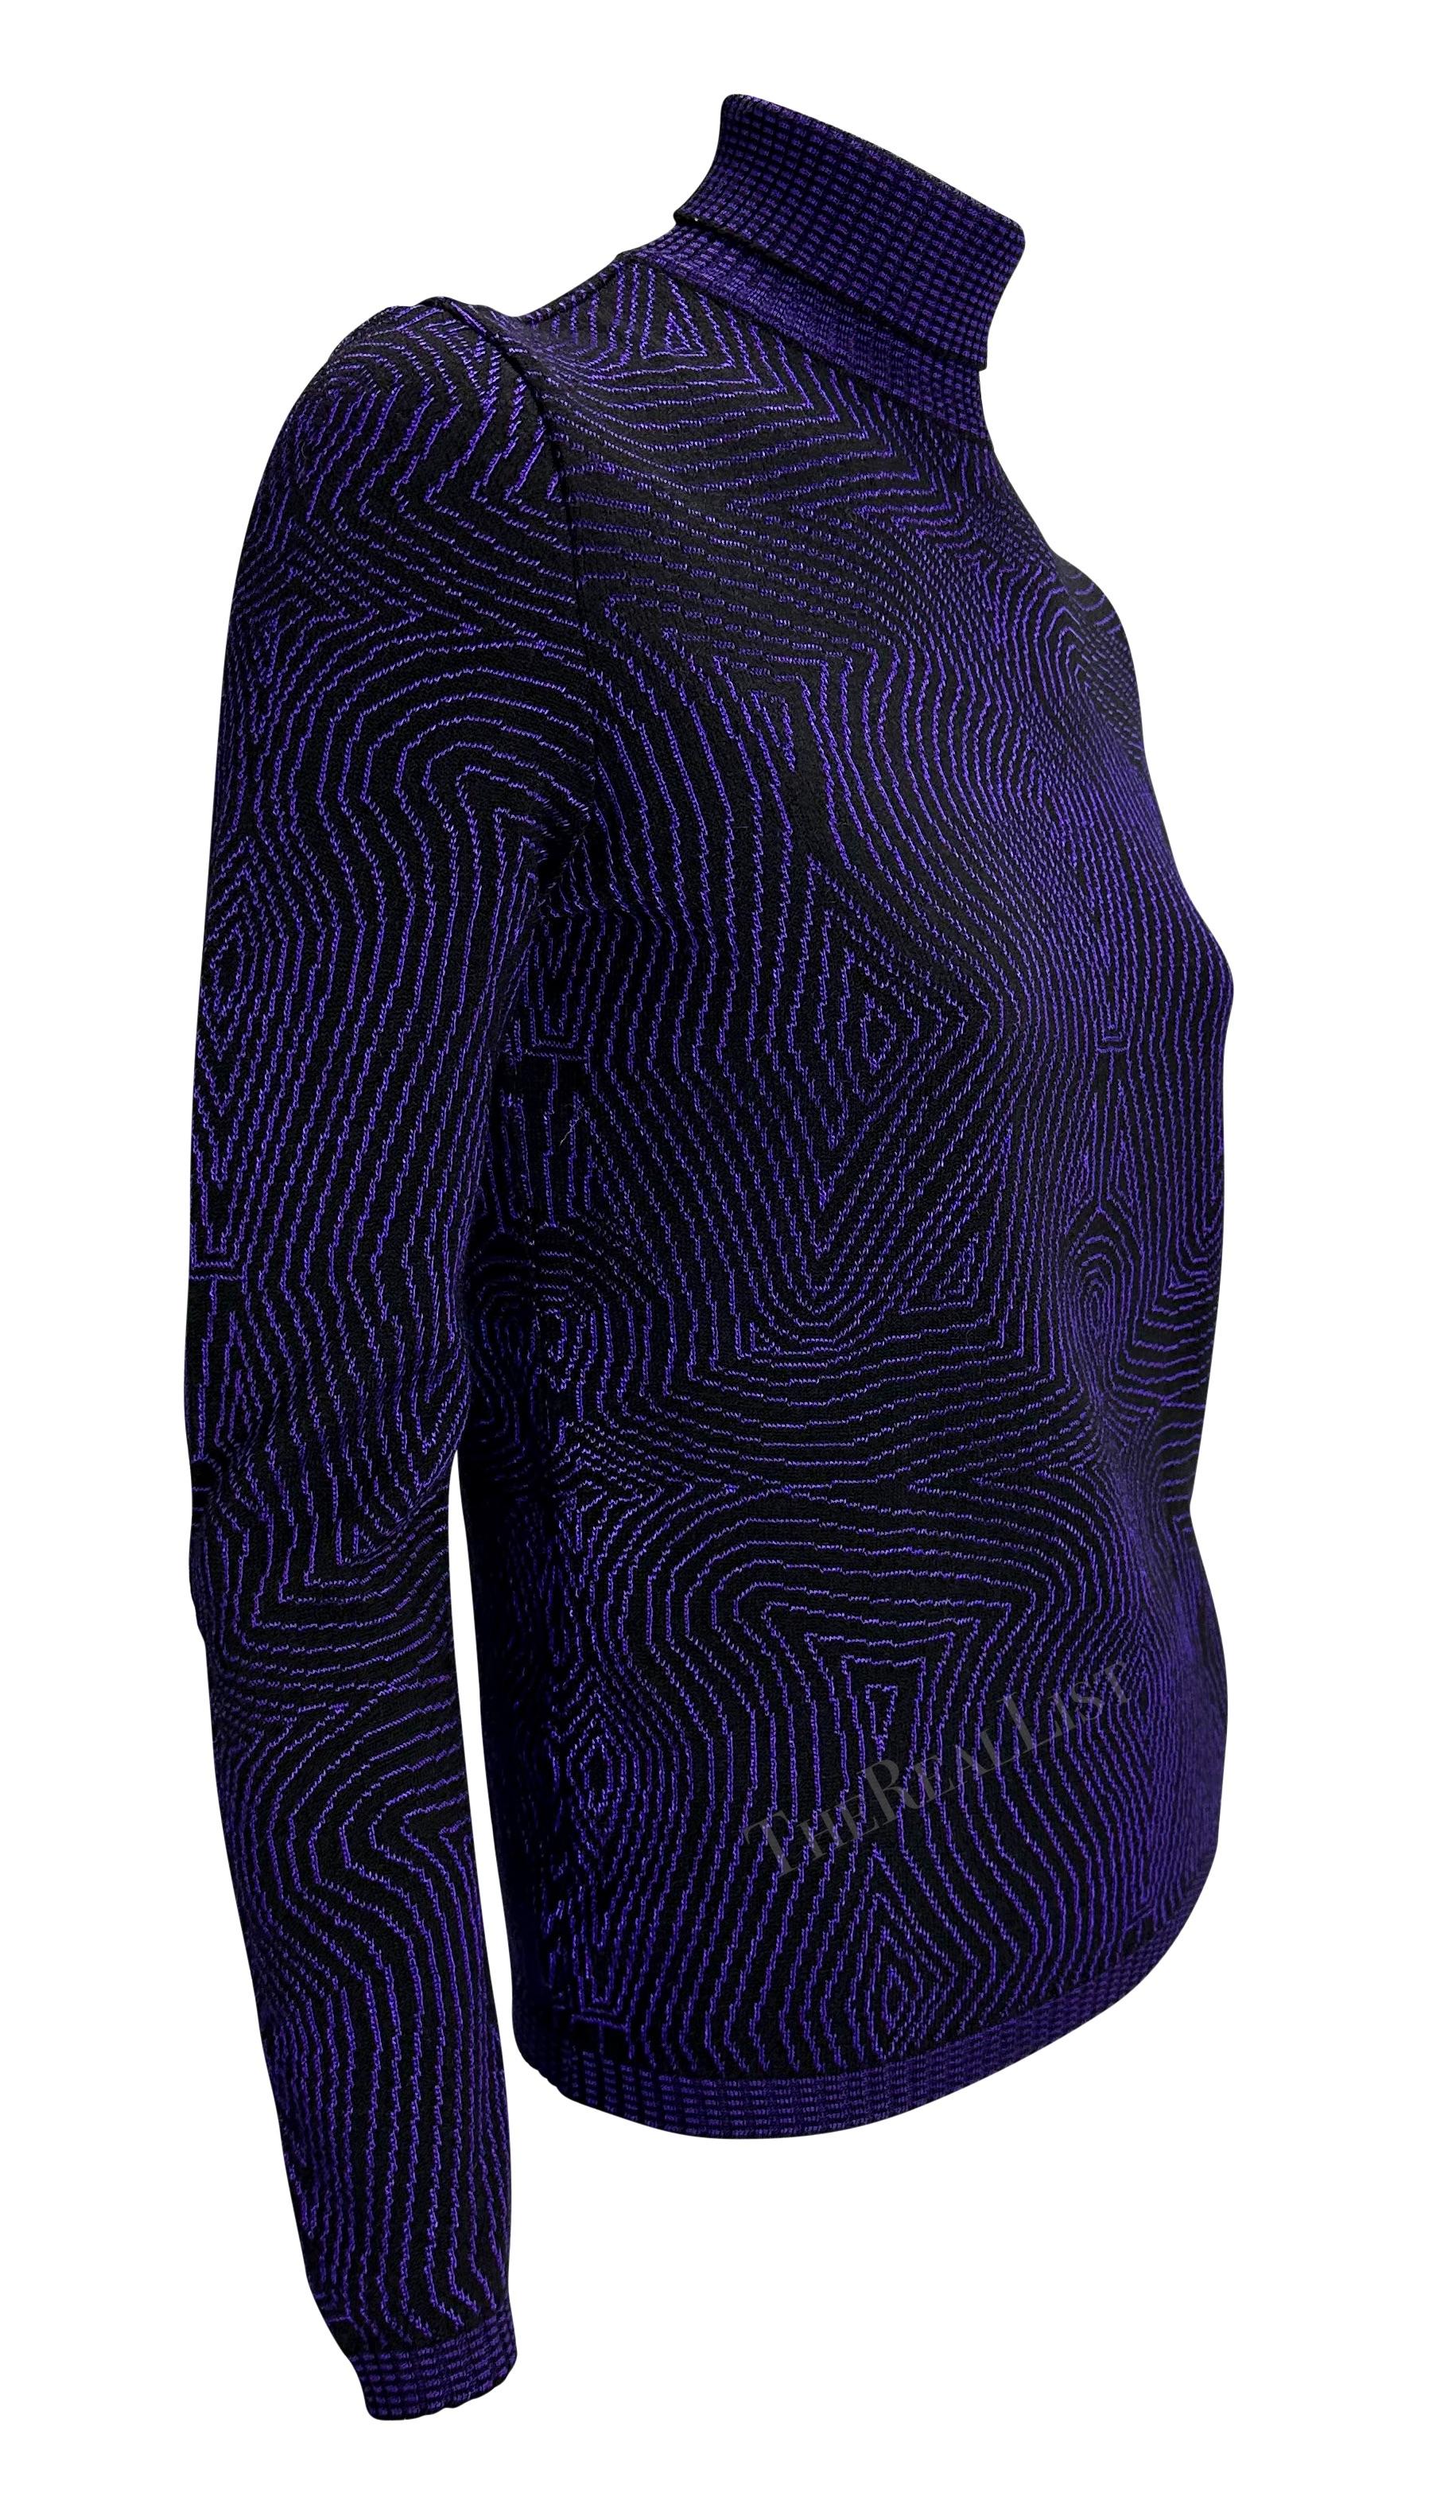 1996 Gianni Versace Purple Psychedelic Op Art Knit Roll-Neck Sweater Top In Excellent Condition For Sale In West Hollywood, CA